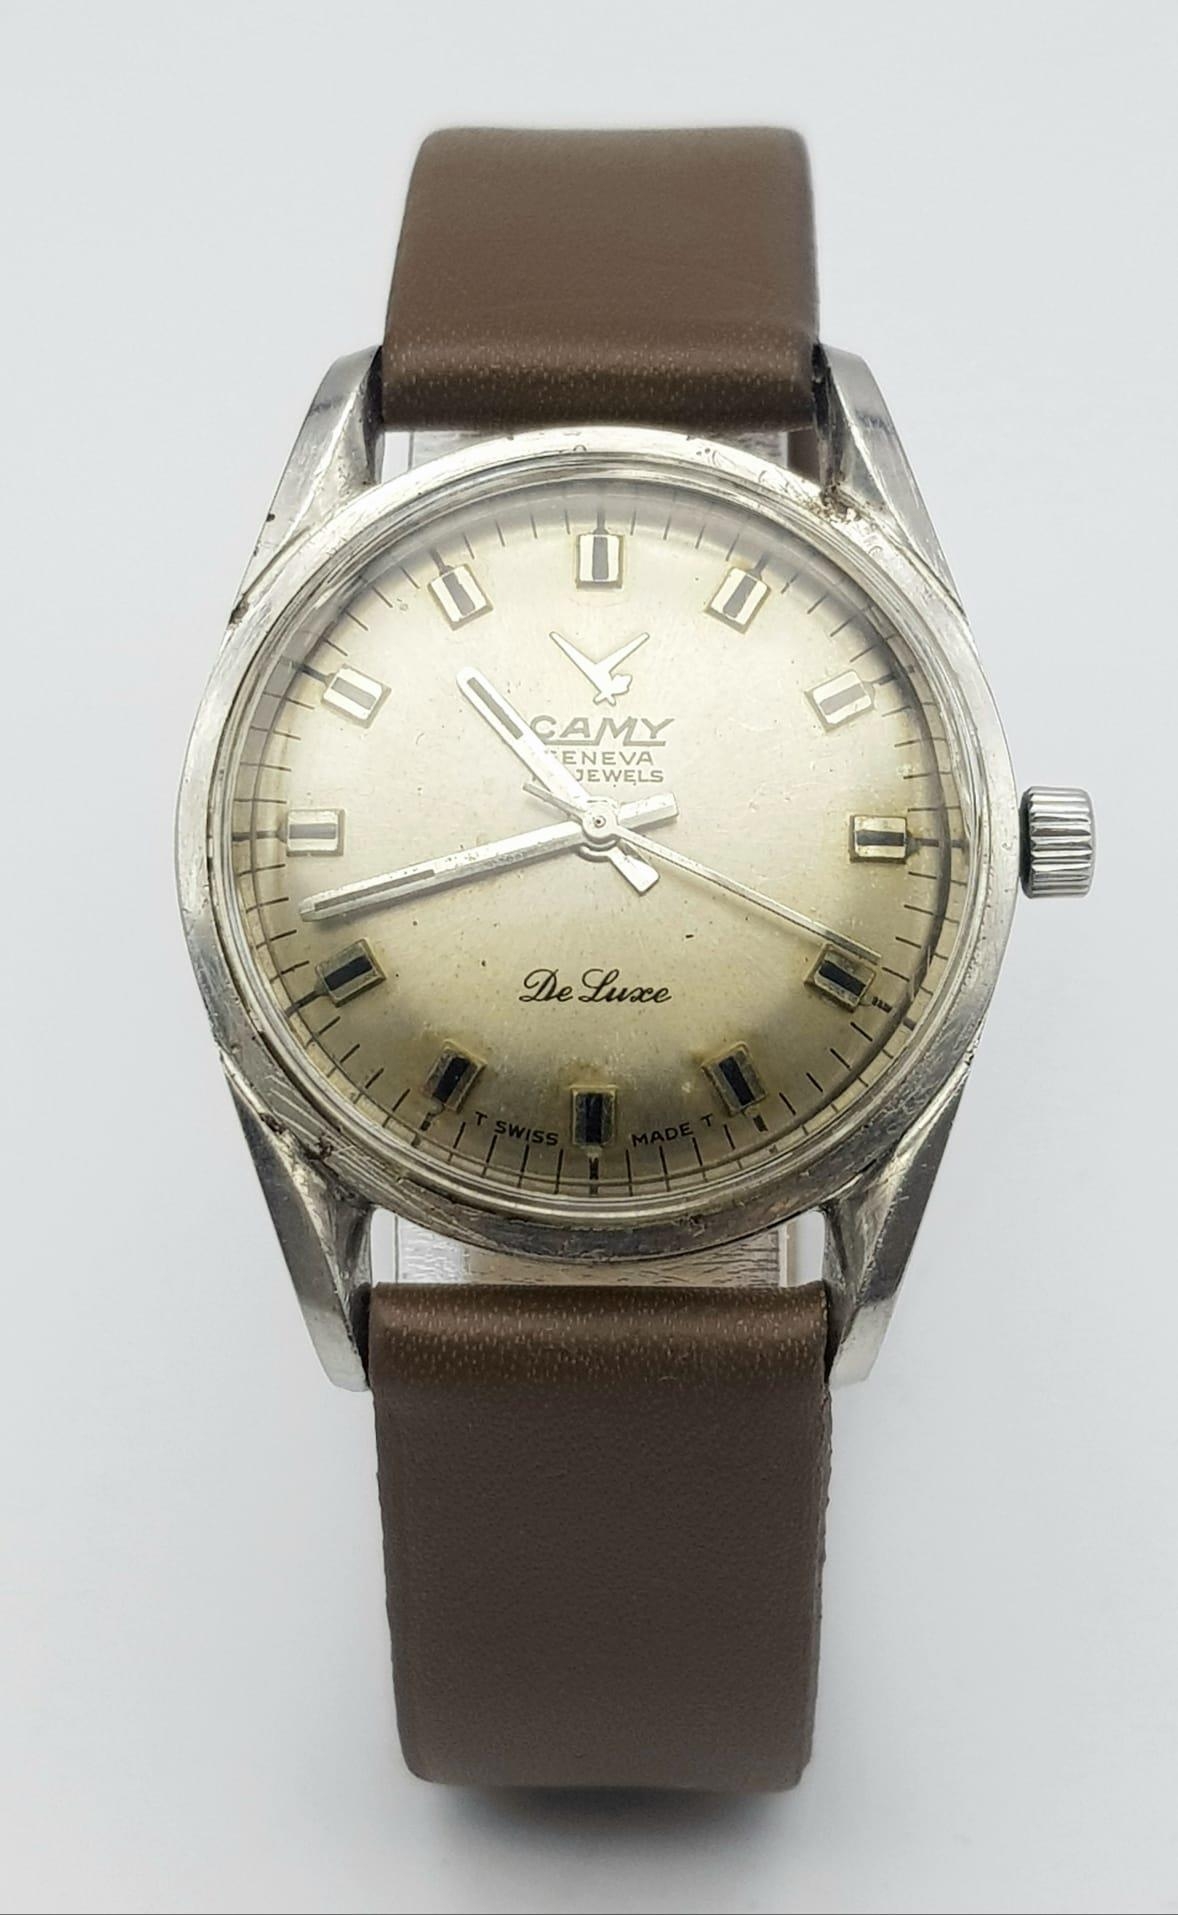 A Vintage Camy 17 Jewel Deluxe Mechanical Gents Watch. Brown leather strap. Stainless steel case - - Image 2 of 4